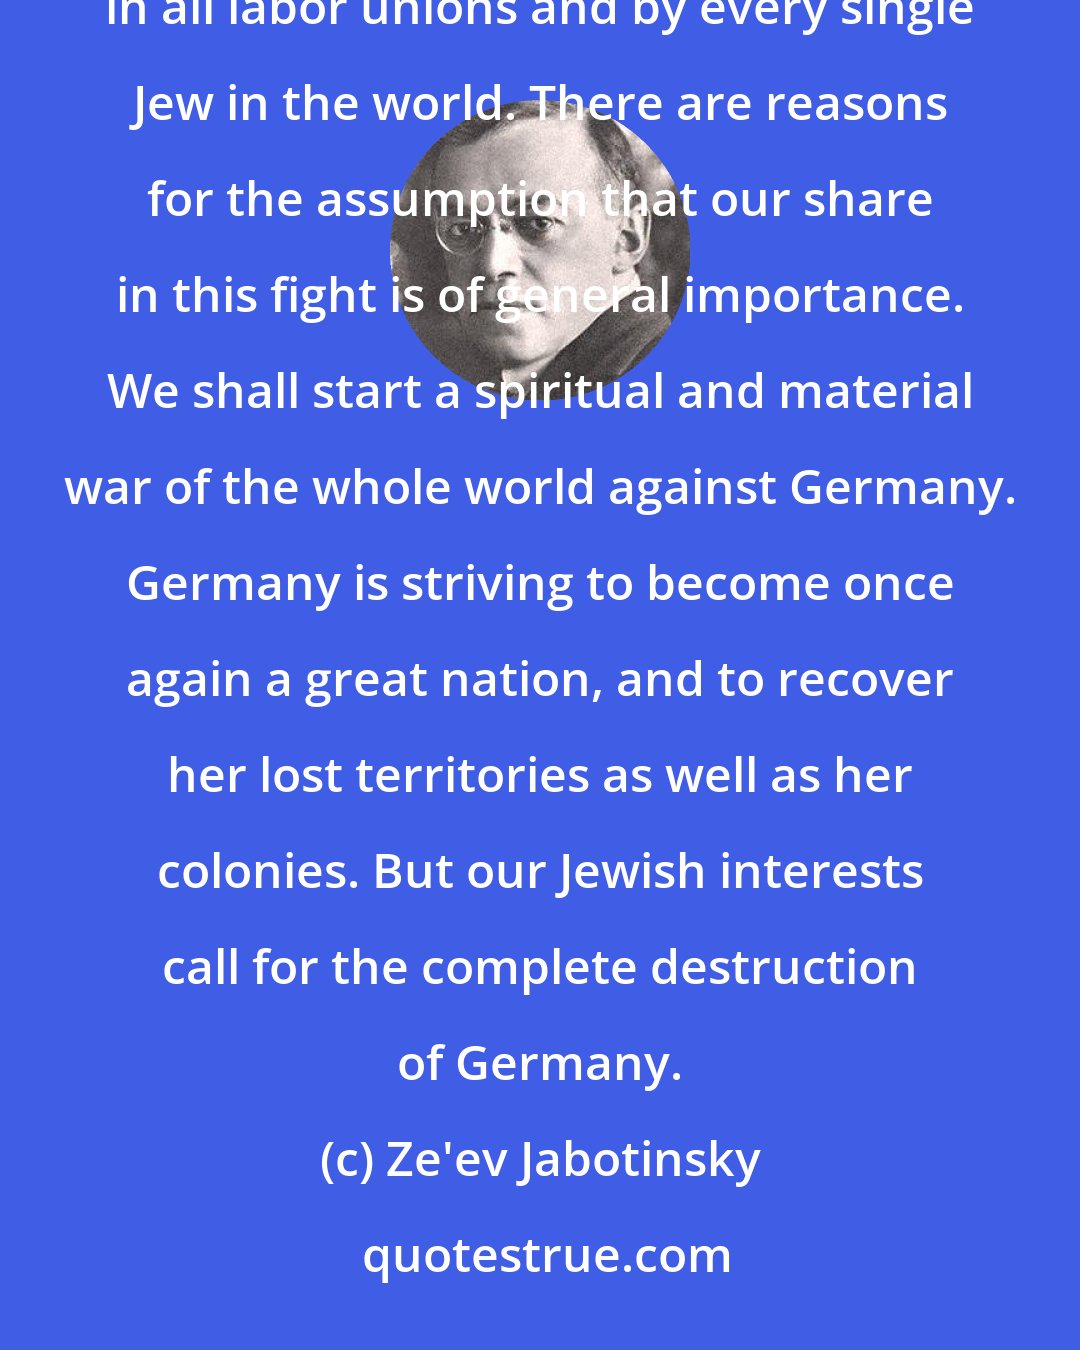 Ze'ev Jabotinsky: The fight against Germany has now been waged for months by every Jewish community, on every conference, in all labor unions and by every single Jew in the world. There are reasons for the assumption that our share in this fight is of general importance. We shall start a spiritual and material war of the whole world against Germany. Germany is striving to become once again a great nation, and to recover her lost territories as well as her colonies. But our Jewish interests call for the complete destruction of Germany.